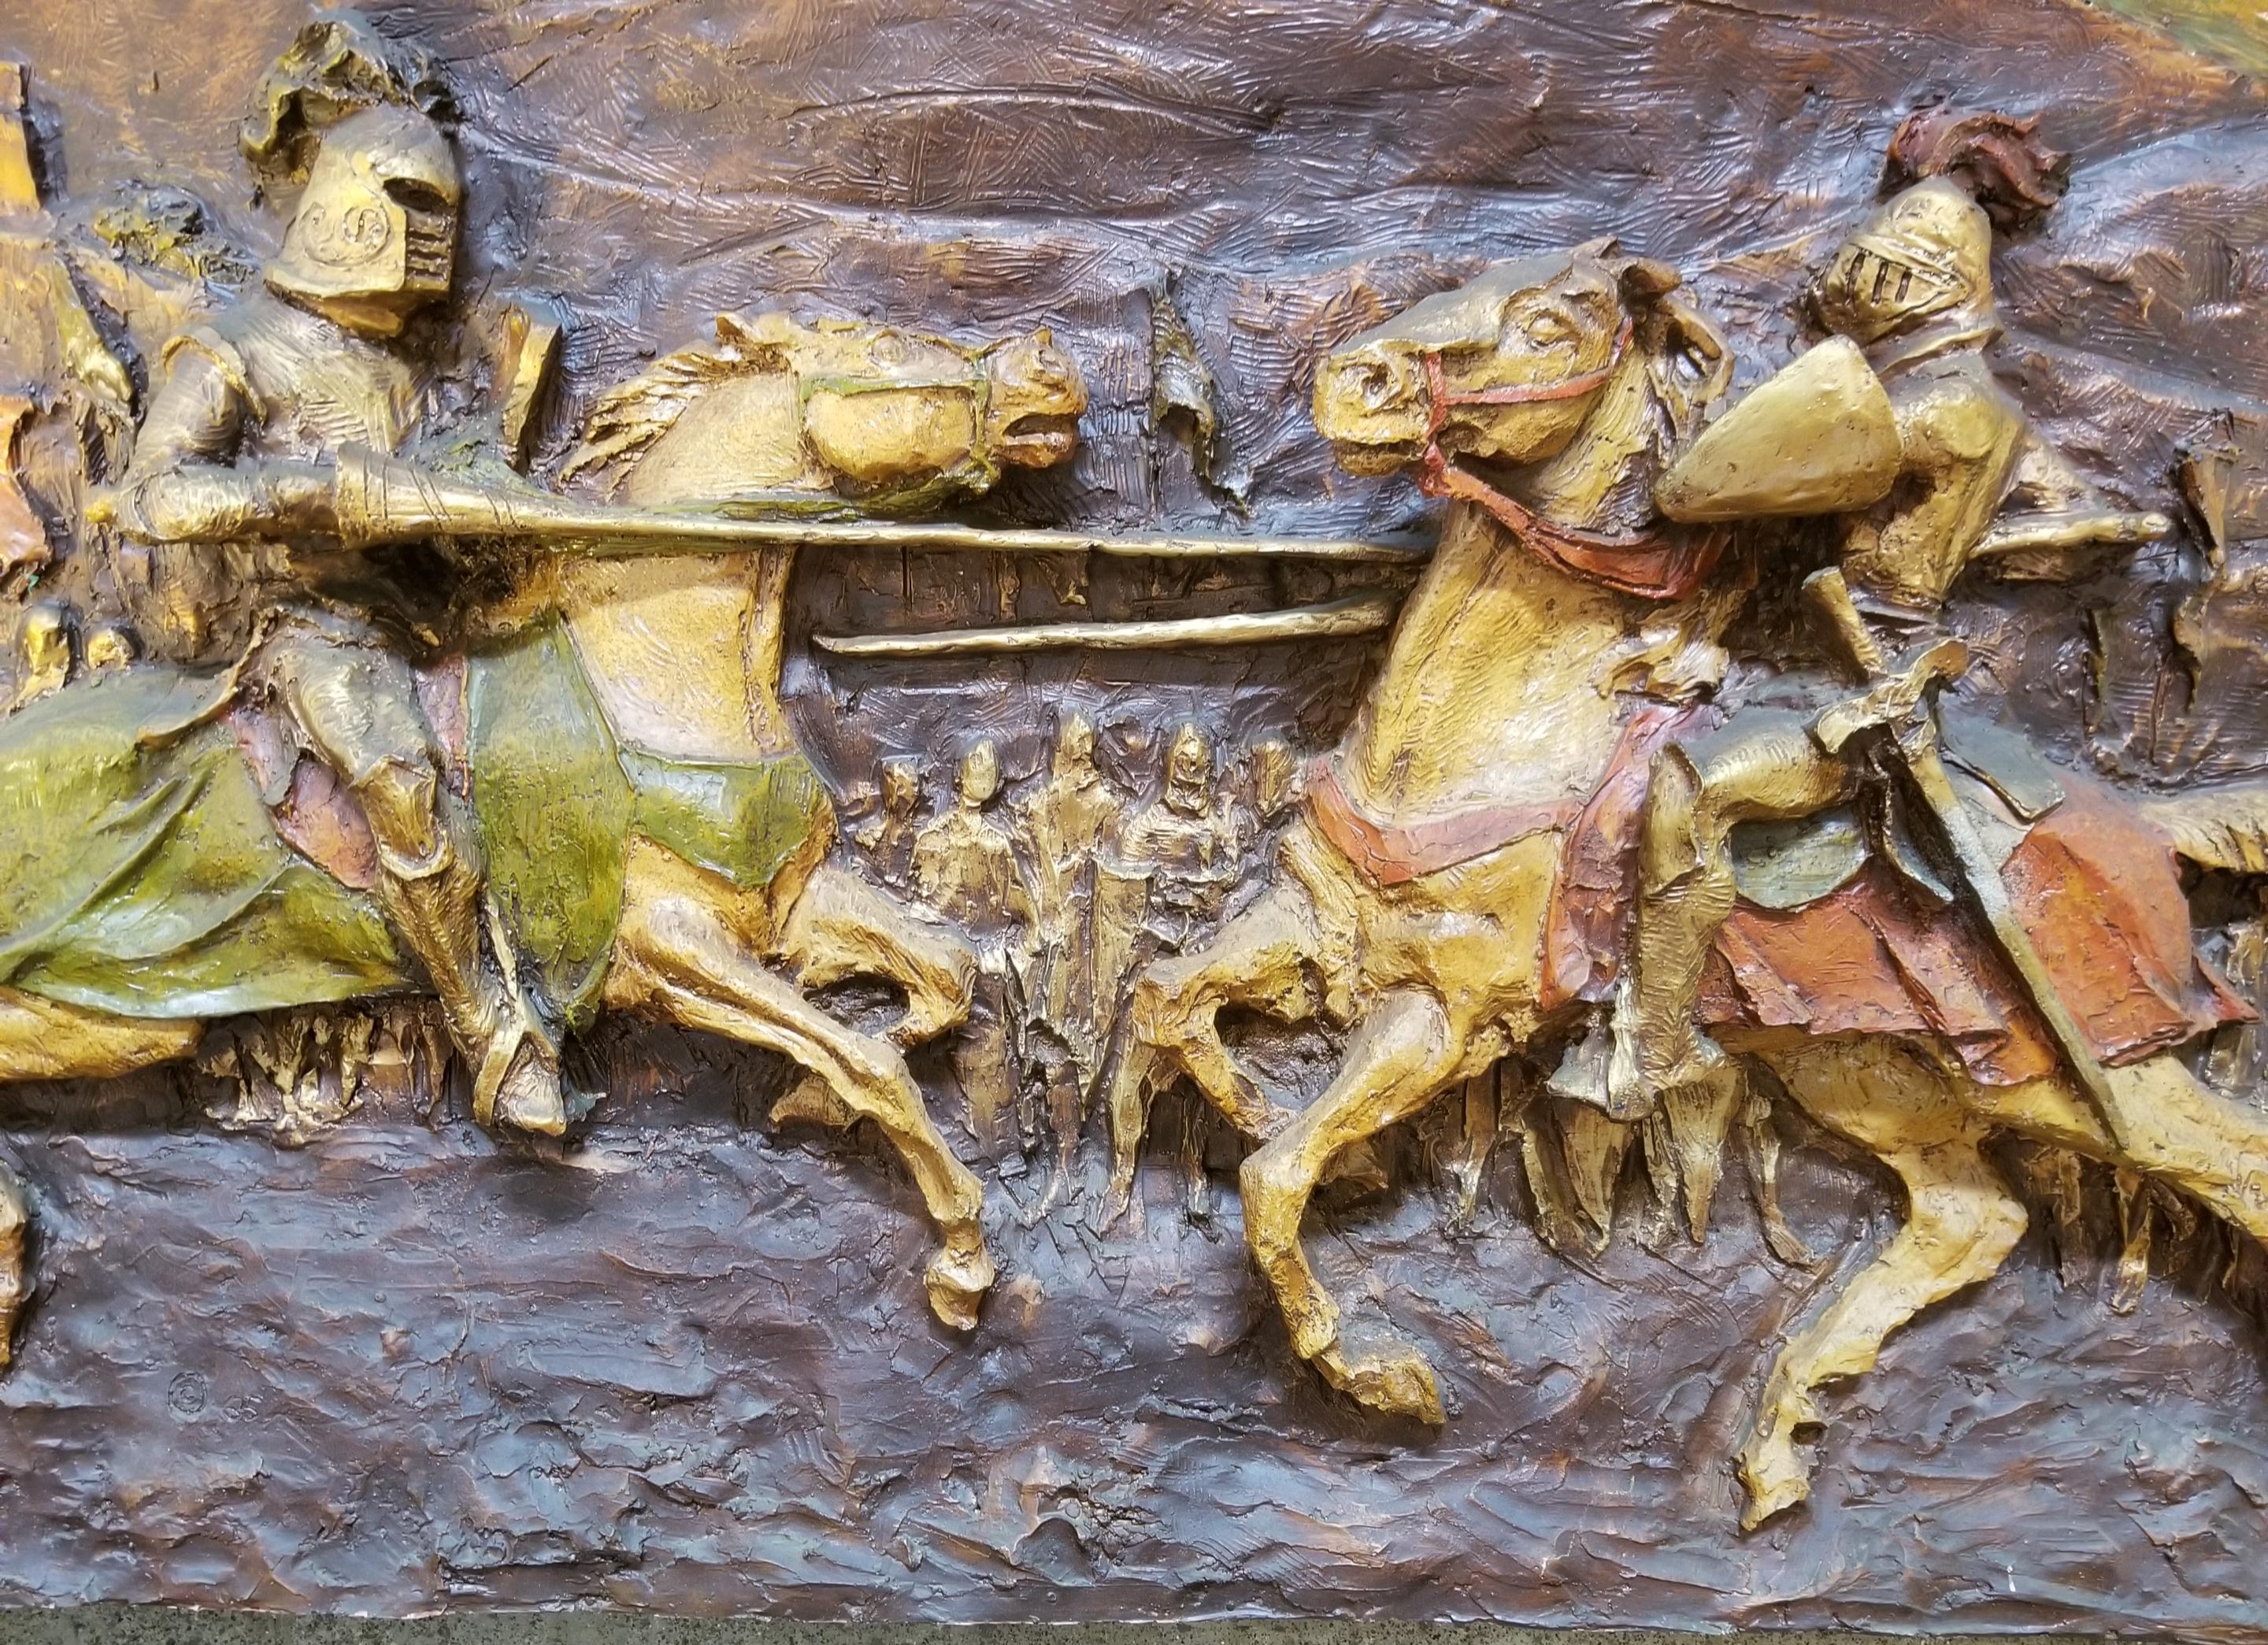 High-relief, 3 dimensional Mid-Century Modern wall sculpture of knights jousting. Made of formed and molded fiberglass. Figures and horses in high relief. Copyright dated 1965, relief signed by artist J. Segura. Impressive, unique wall mounted